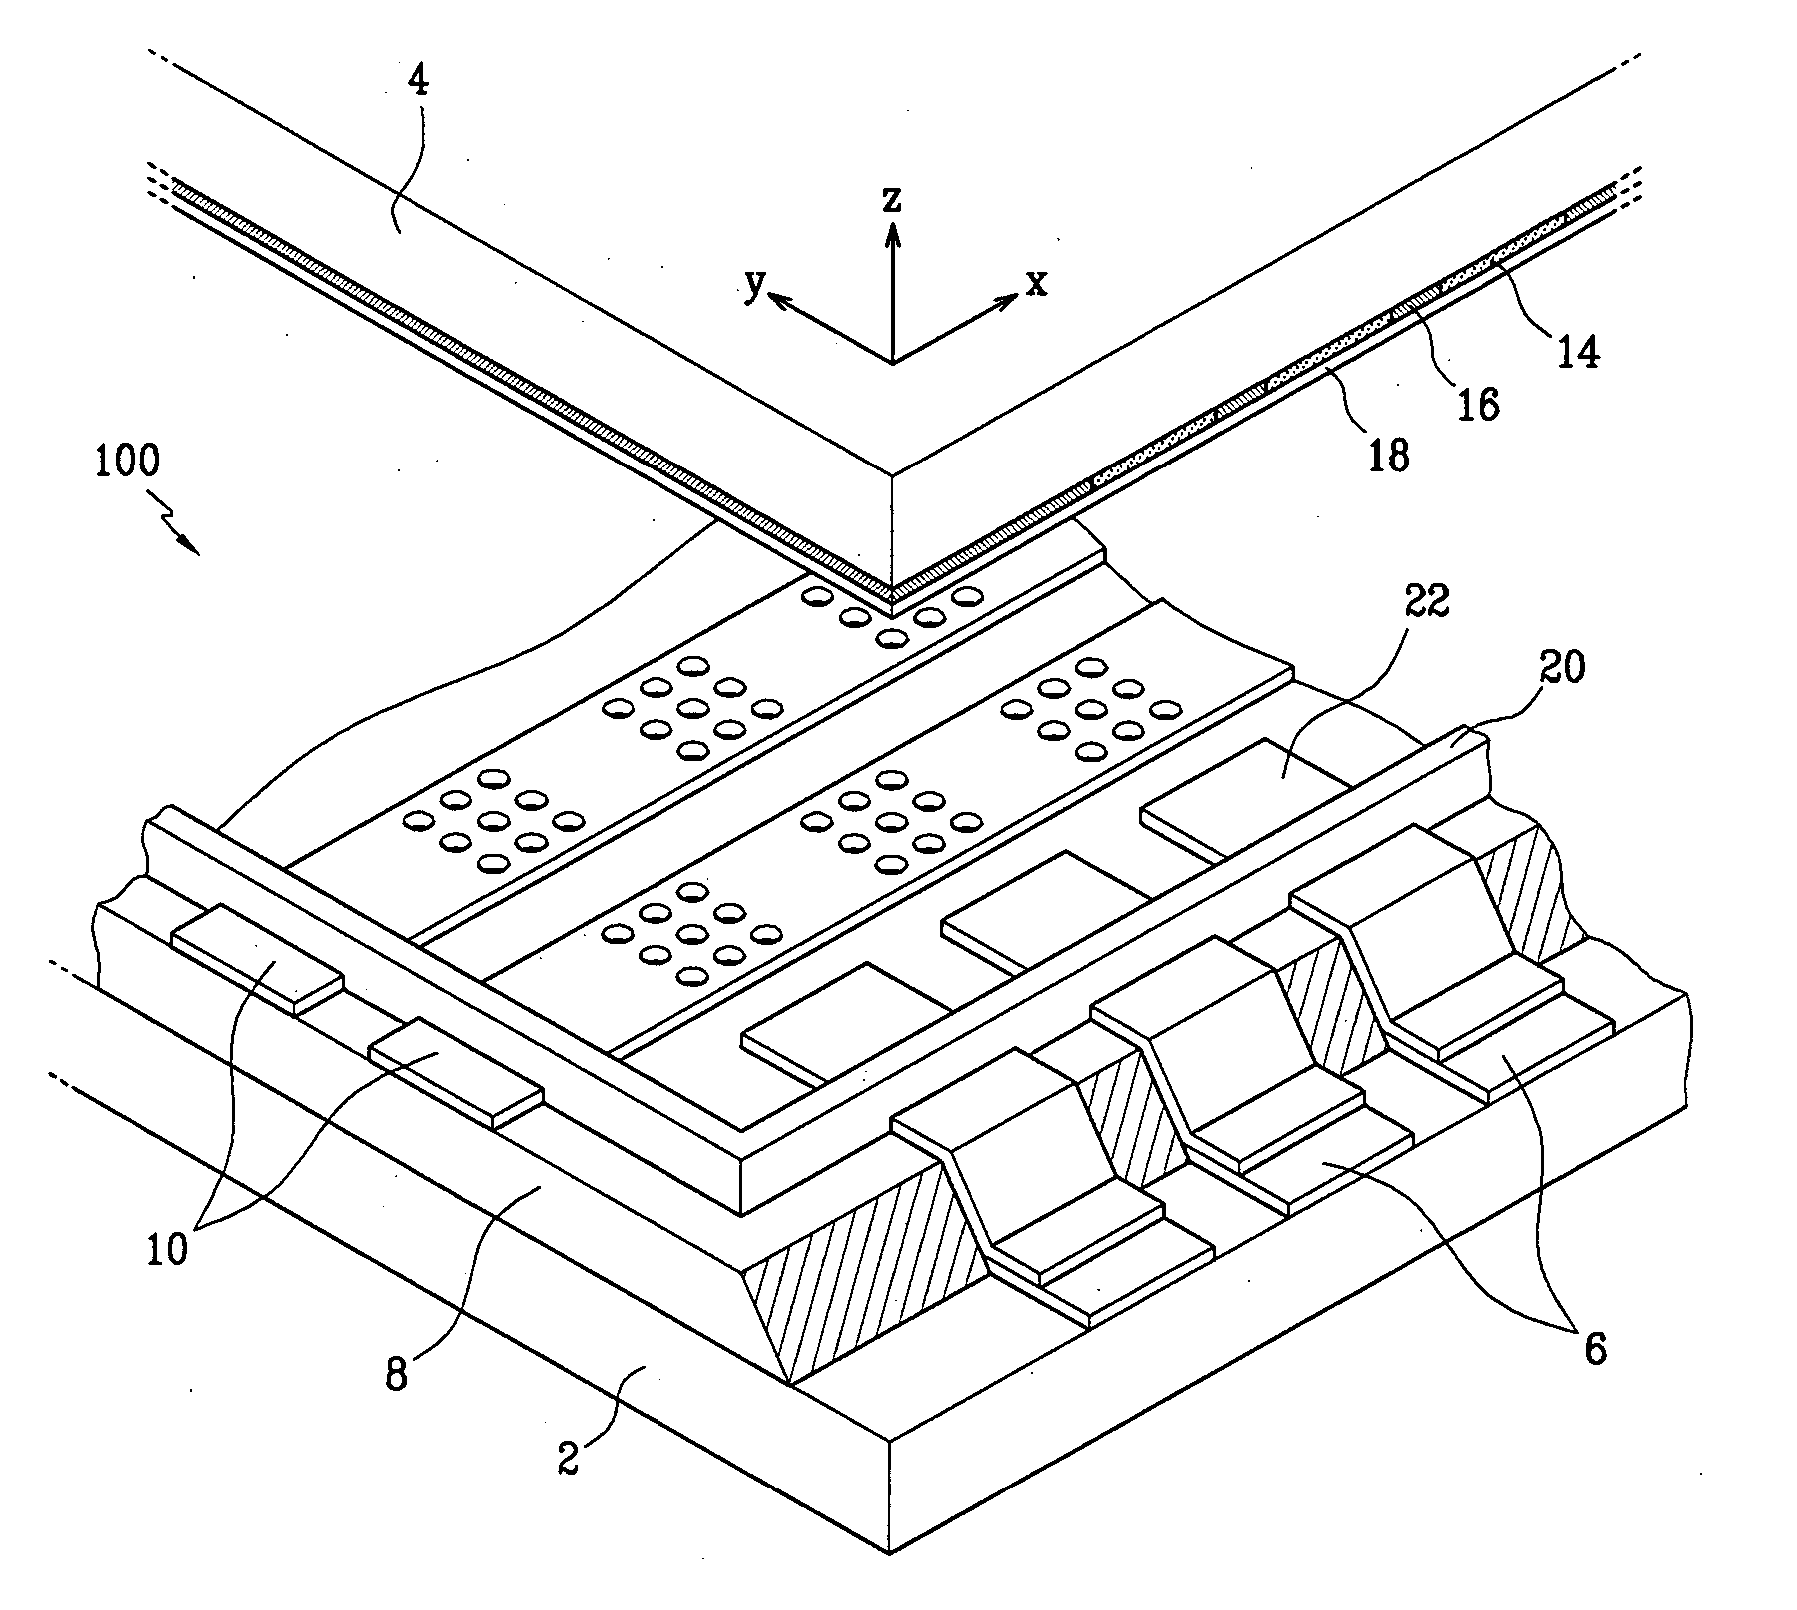 Electron emission device including conductive layers for preventing accumulation of static charge